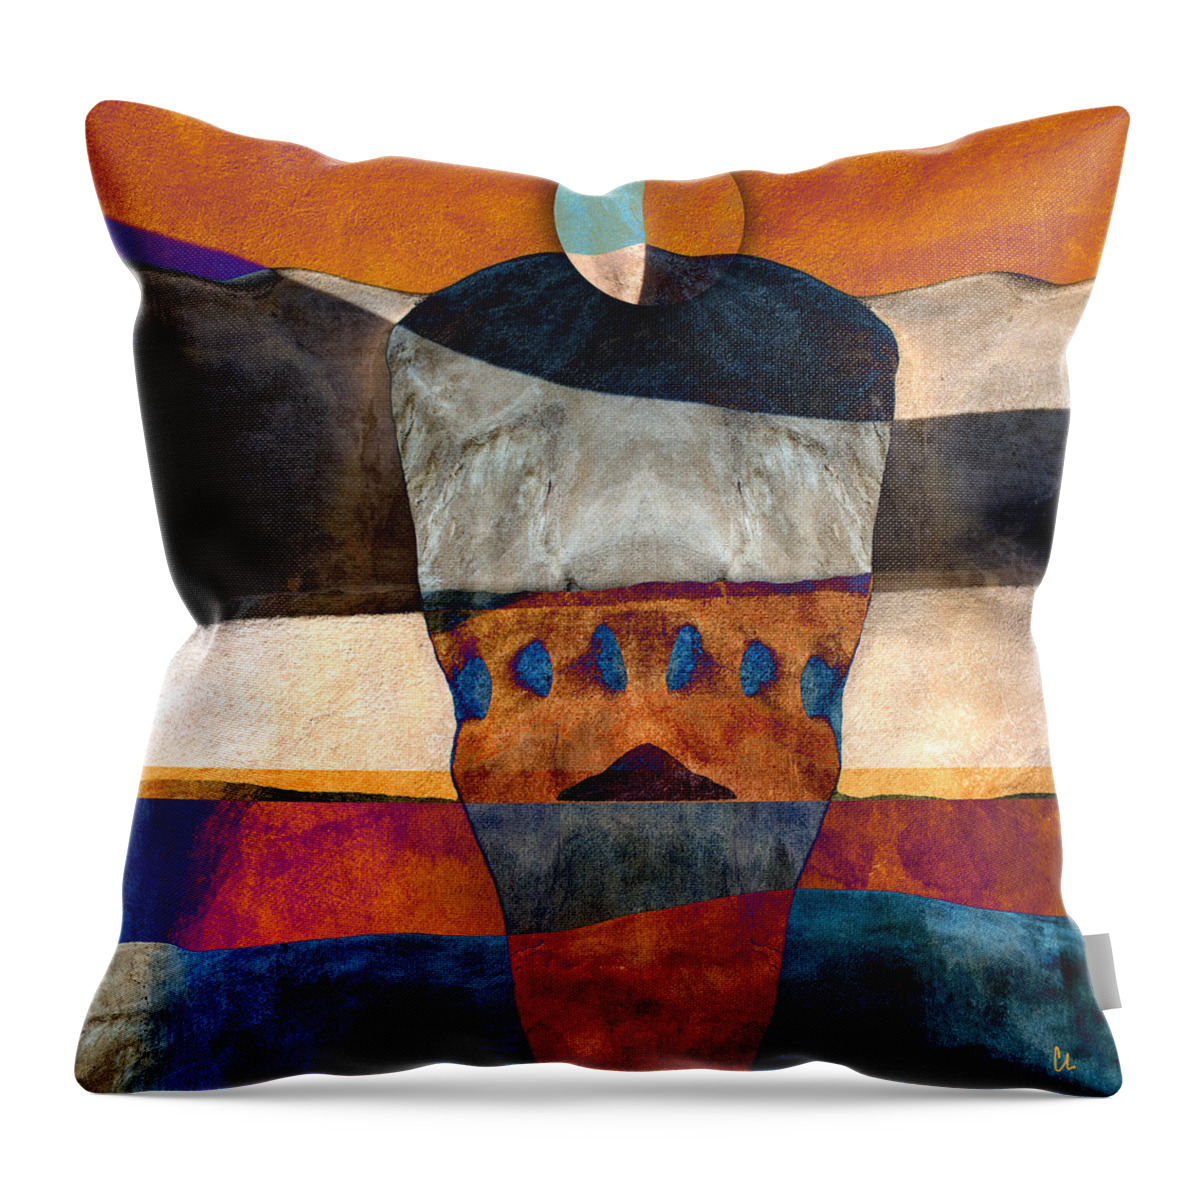 Santa Fe Throw Pillow featuring the photograph Inherent Number 2 by Carol Leigh